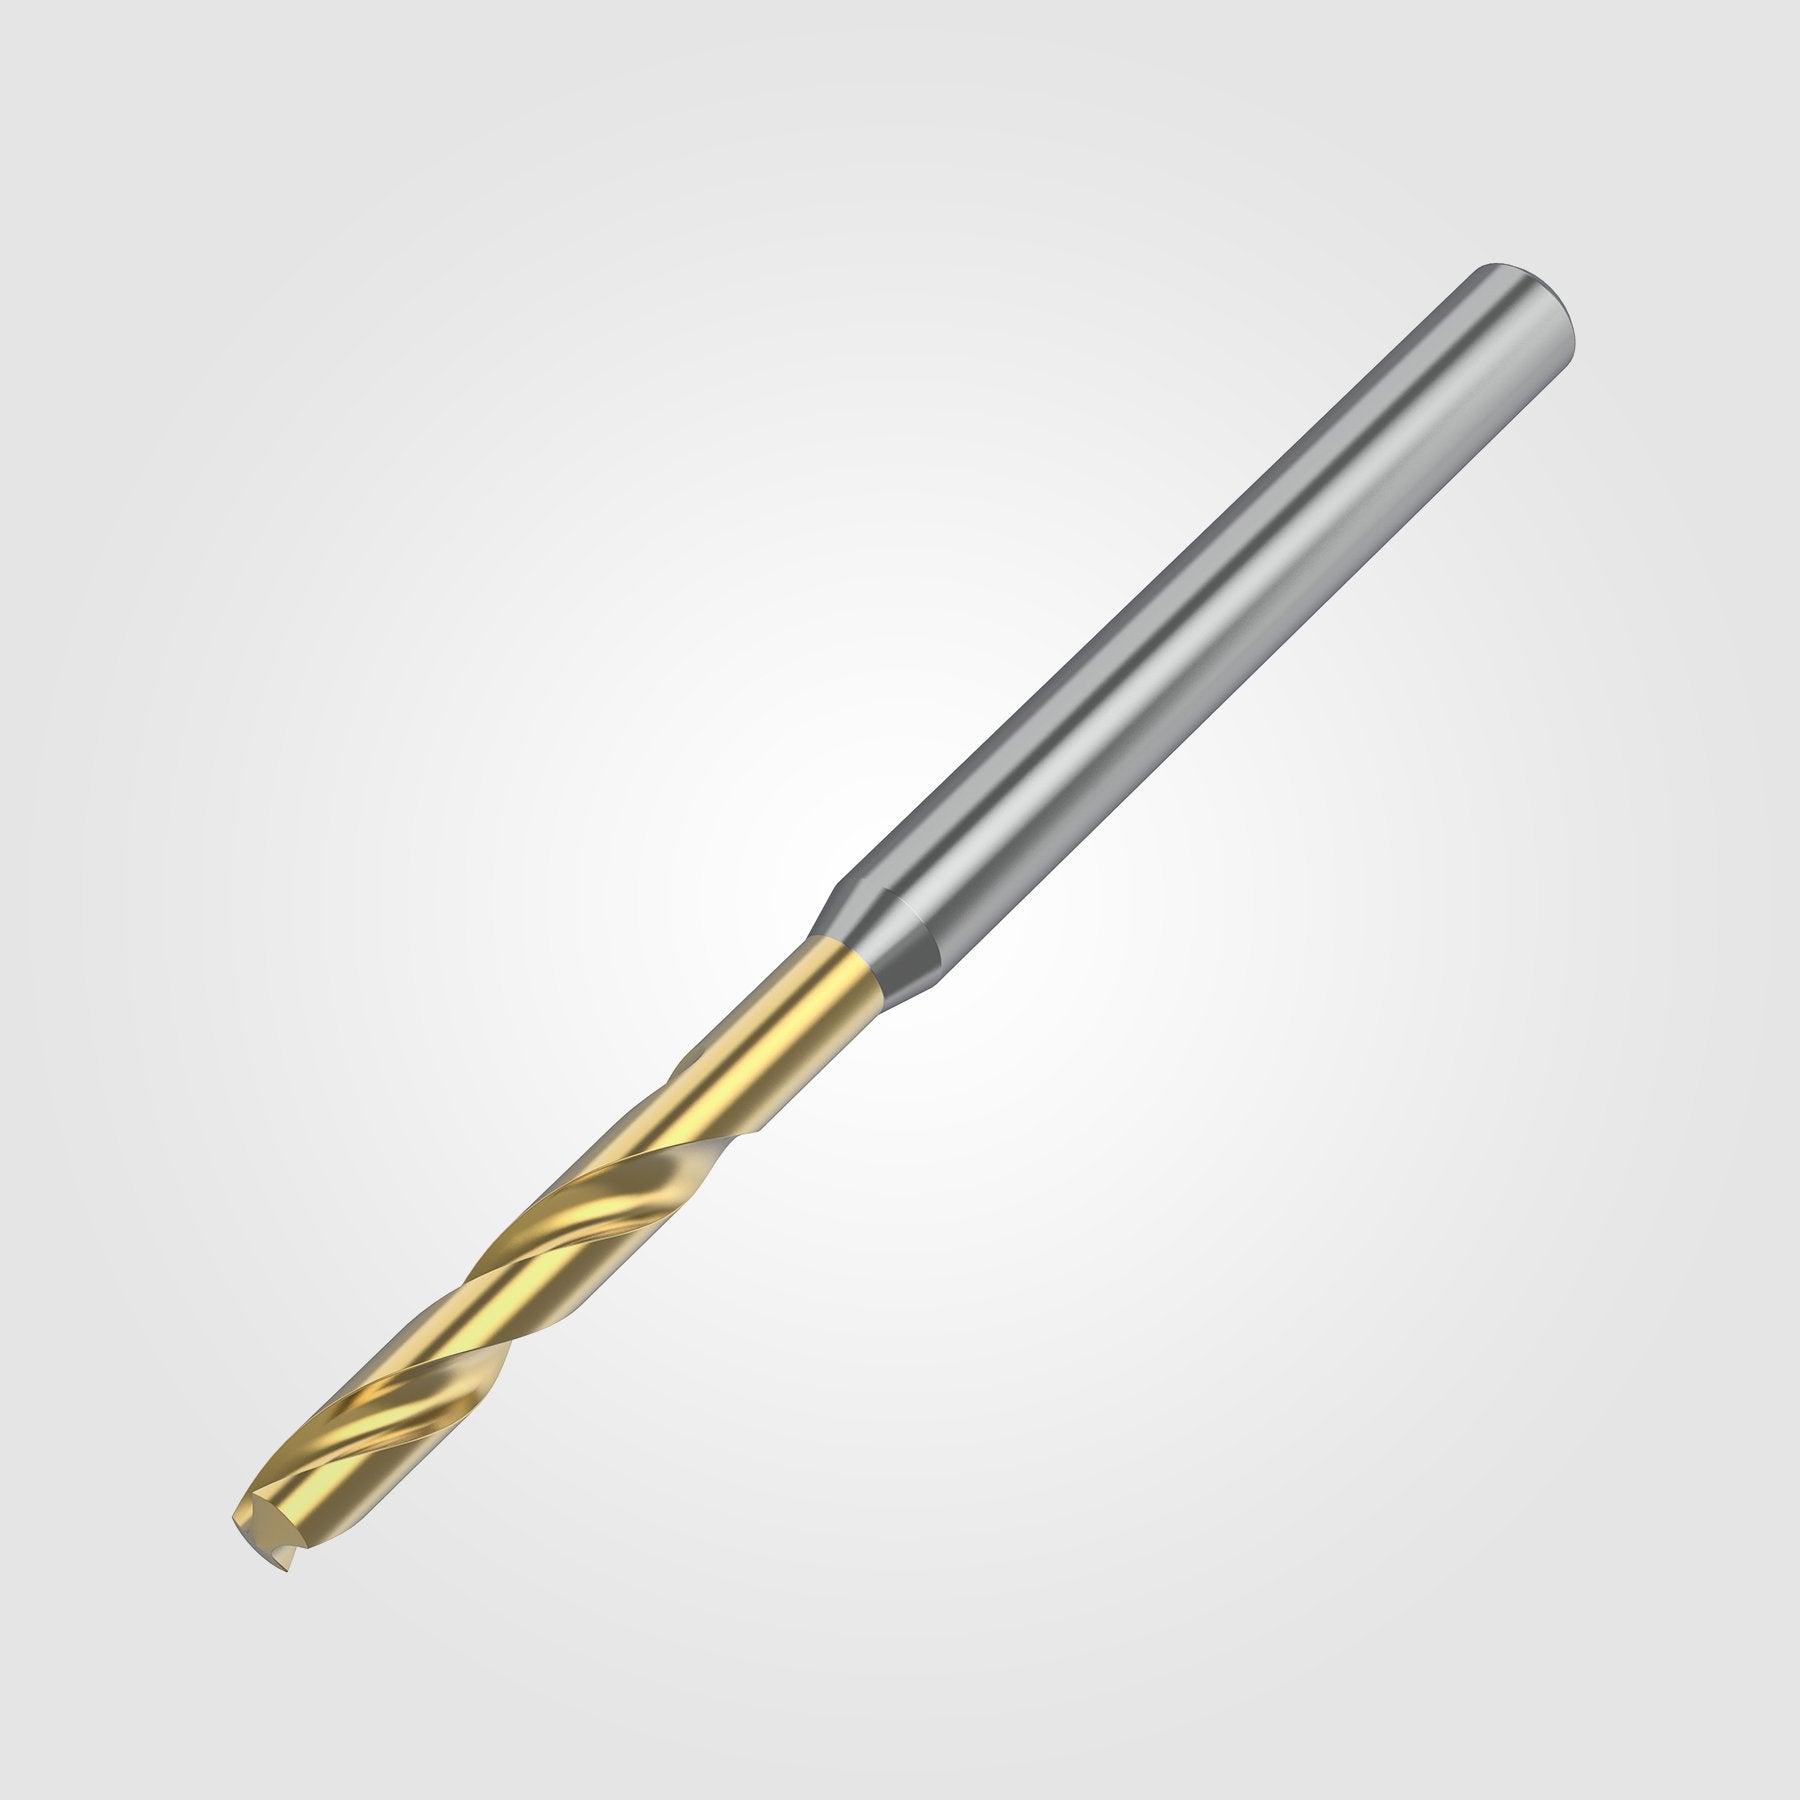 GOdrill (THROUGH COOLANT) | 7.3mm / .2874" / 3xD | SOLID CARBIDE DRILL | 4151166